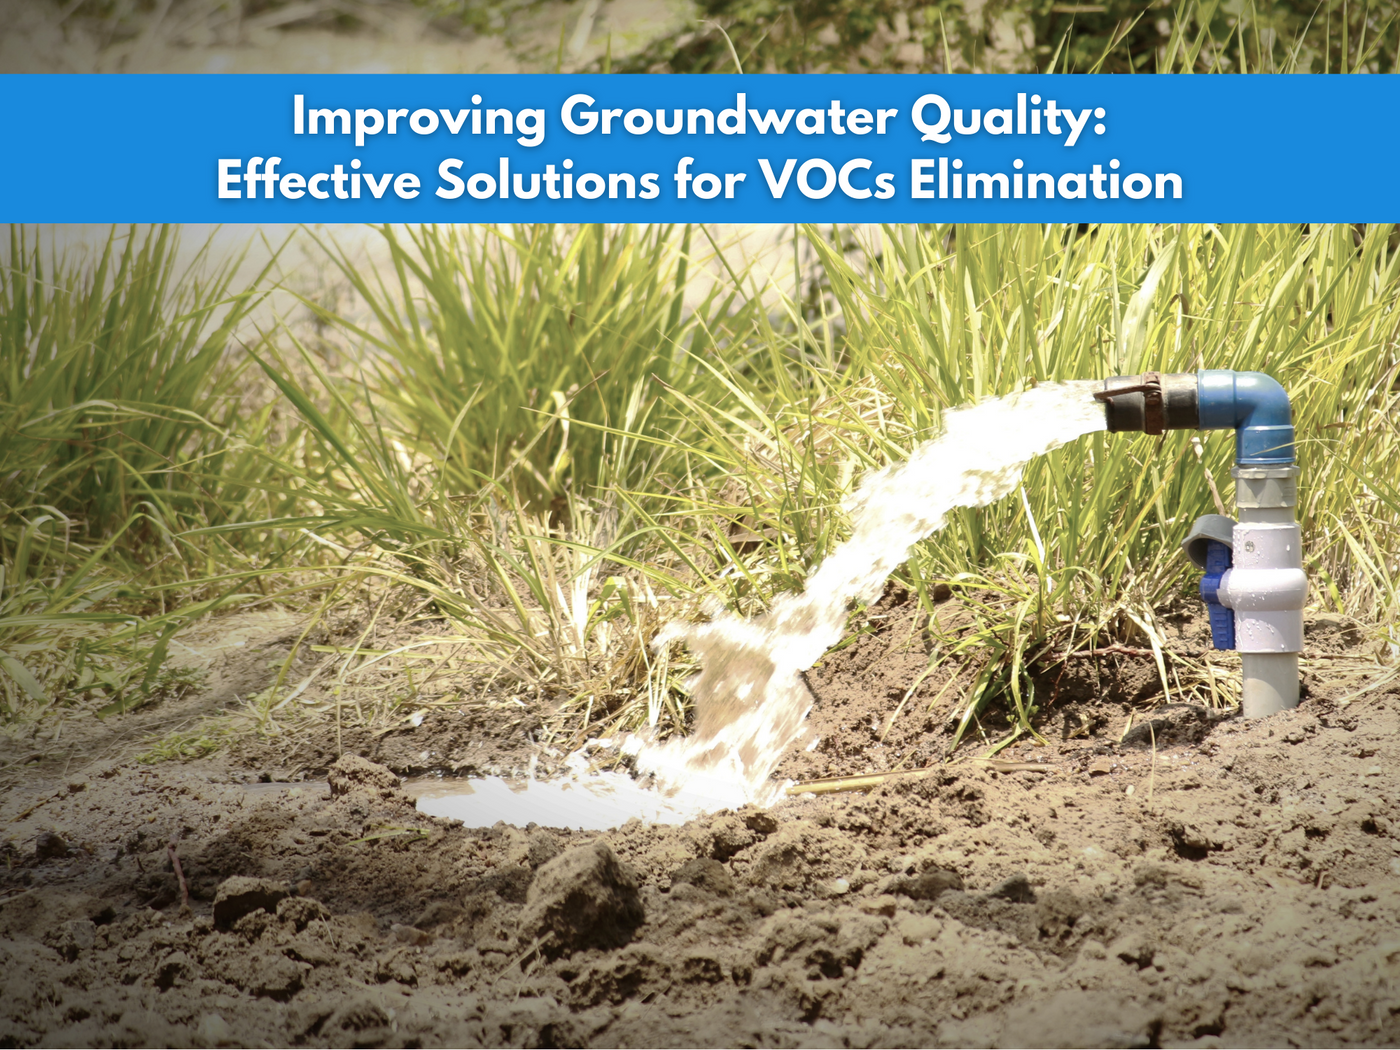 Improving Groundwater Quality: Effective Solutions for VOCs Elimination